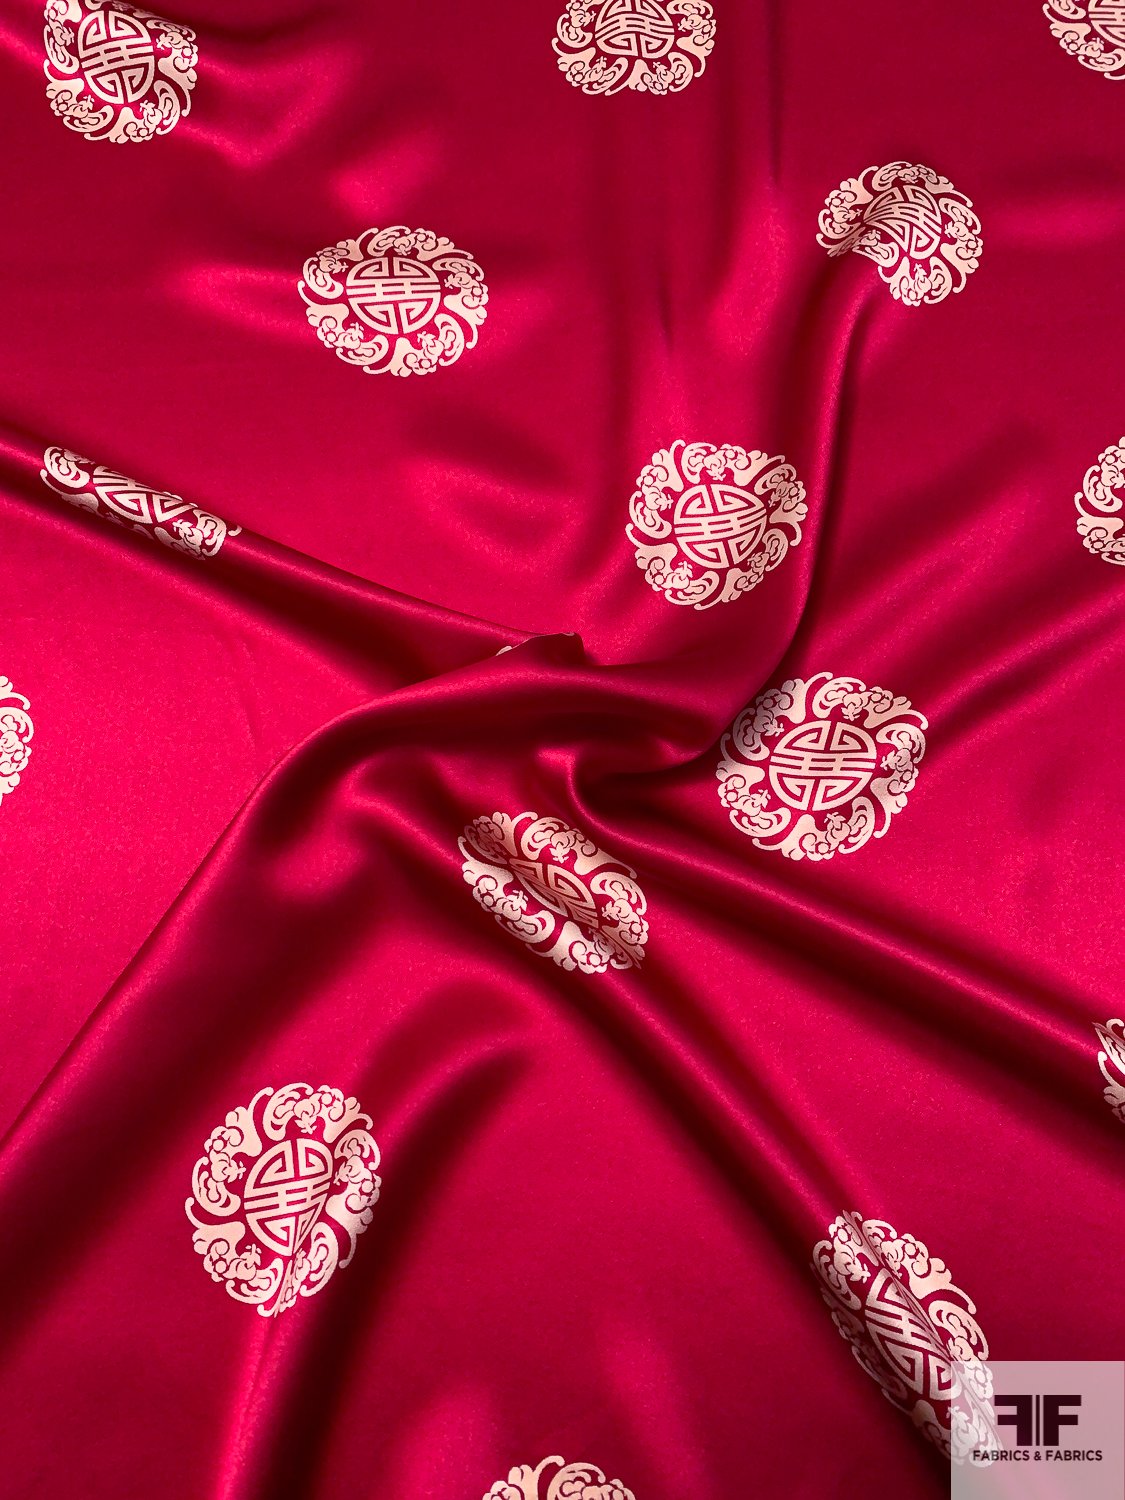 Ornate Medallions Printed Silk Charmeuse - Cranberry Red / Cream